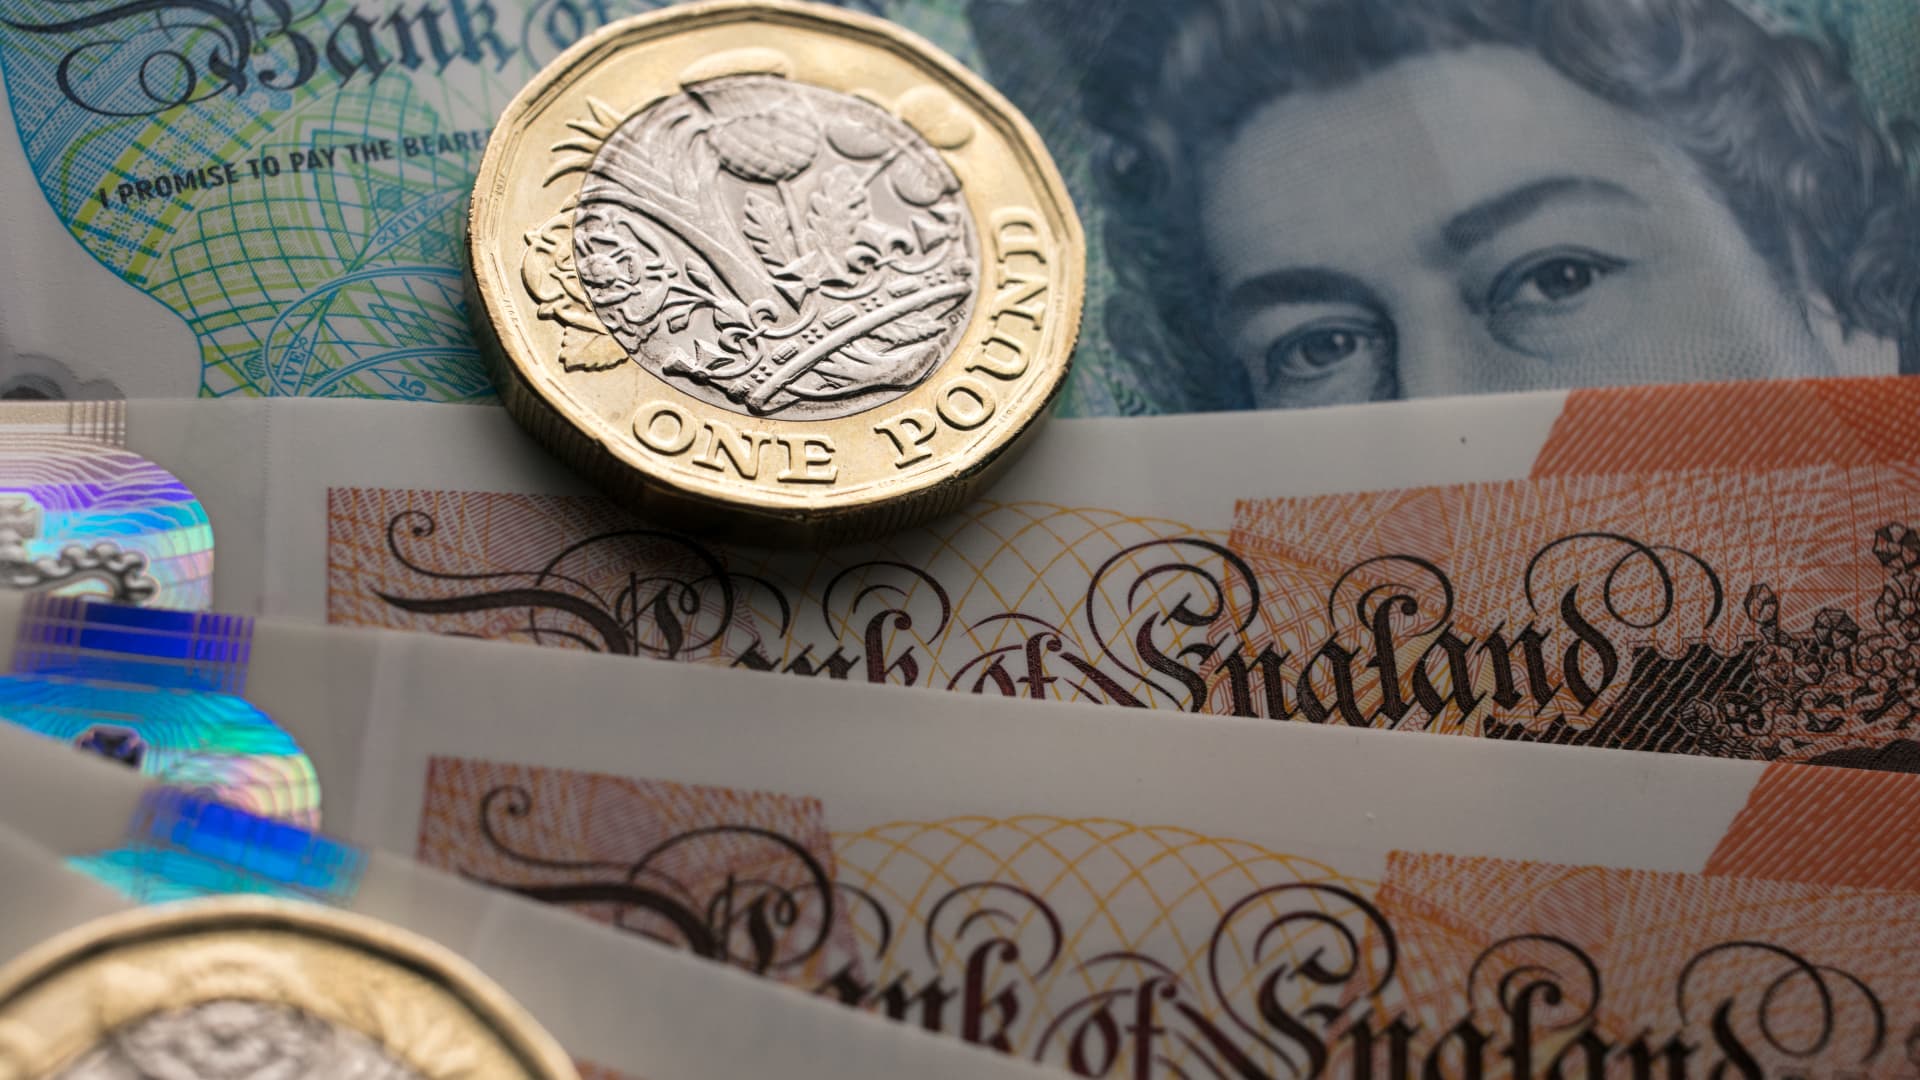 The British pound falls 2% against the dollar after a decline warning from the Bank of England